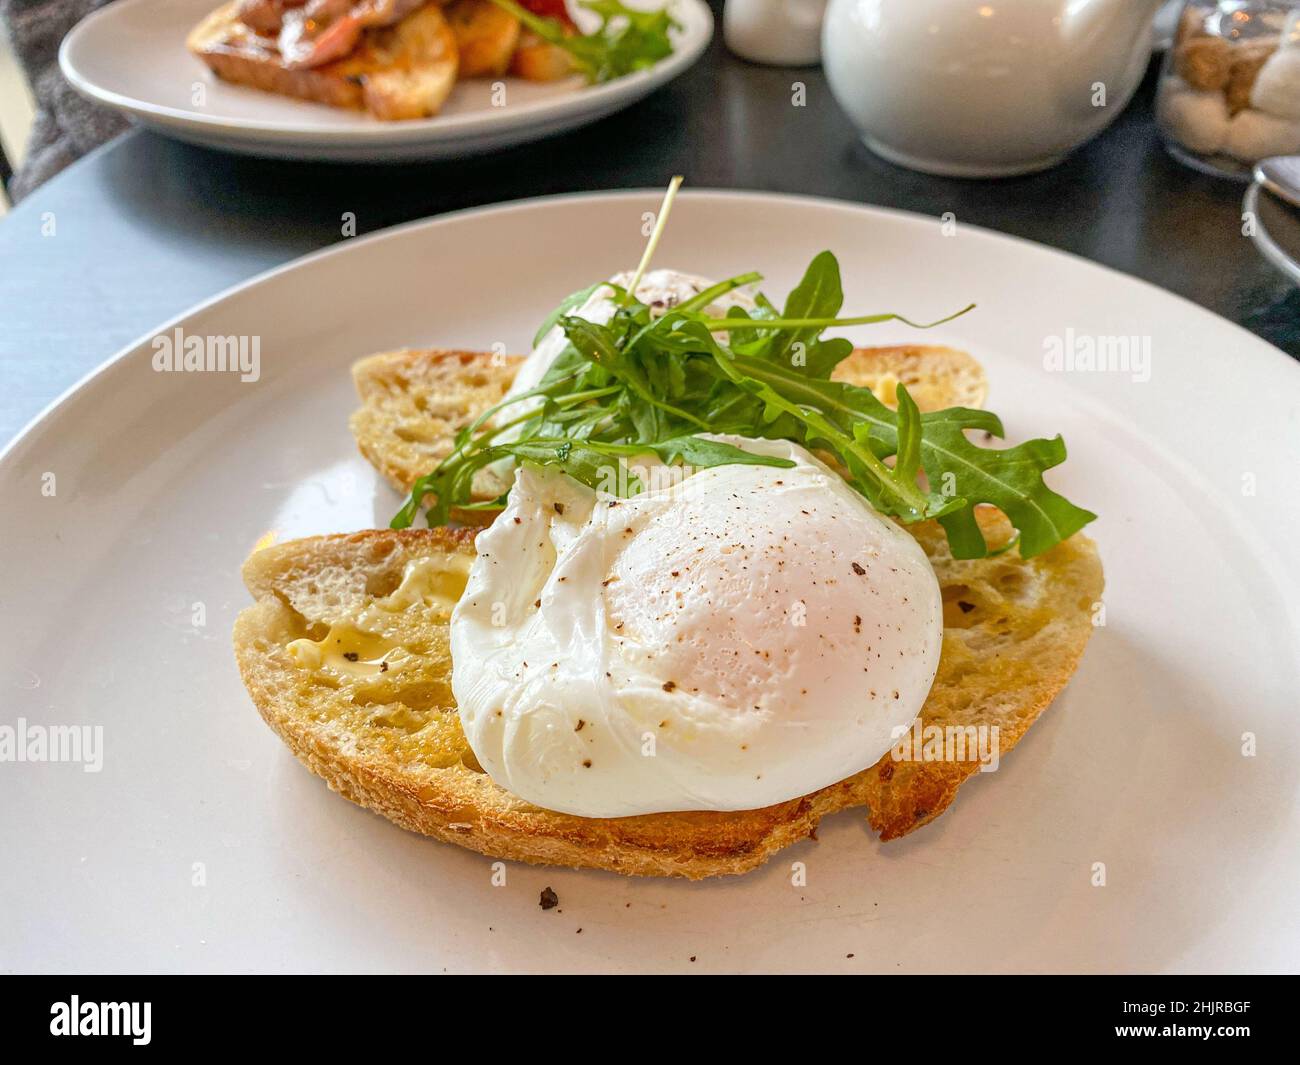 Poached eggs on toasted bread Stock Photo